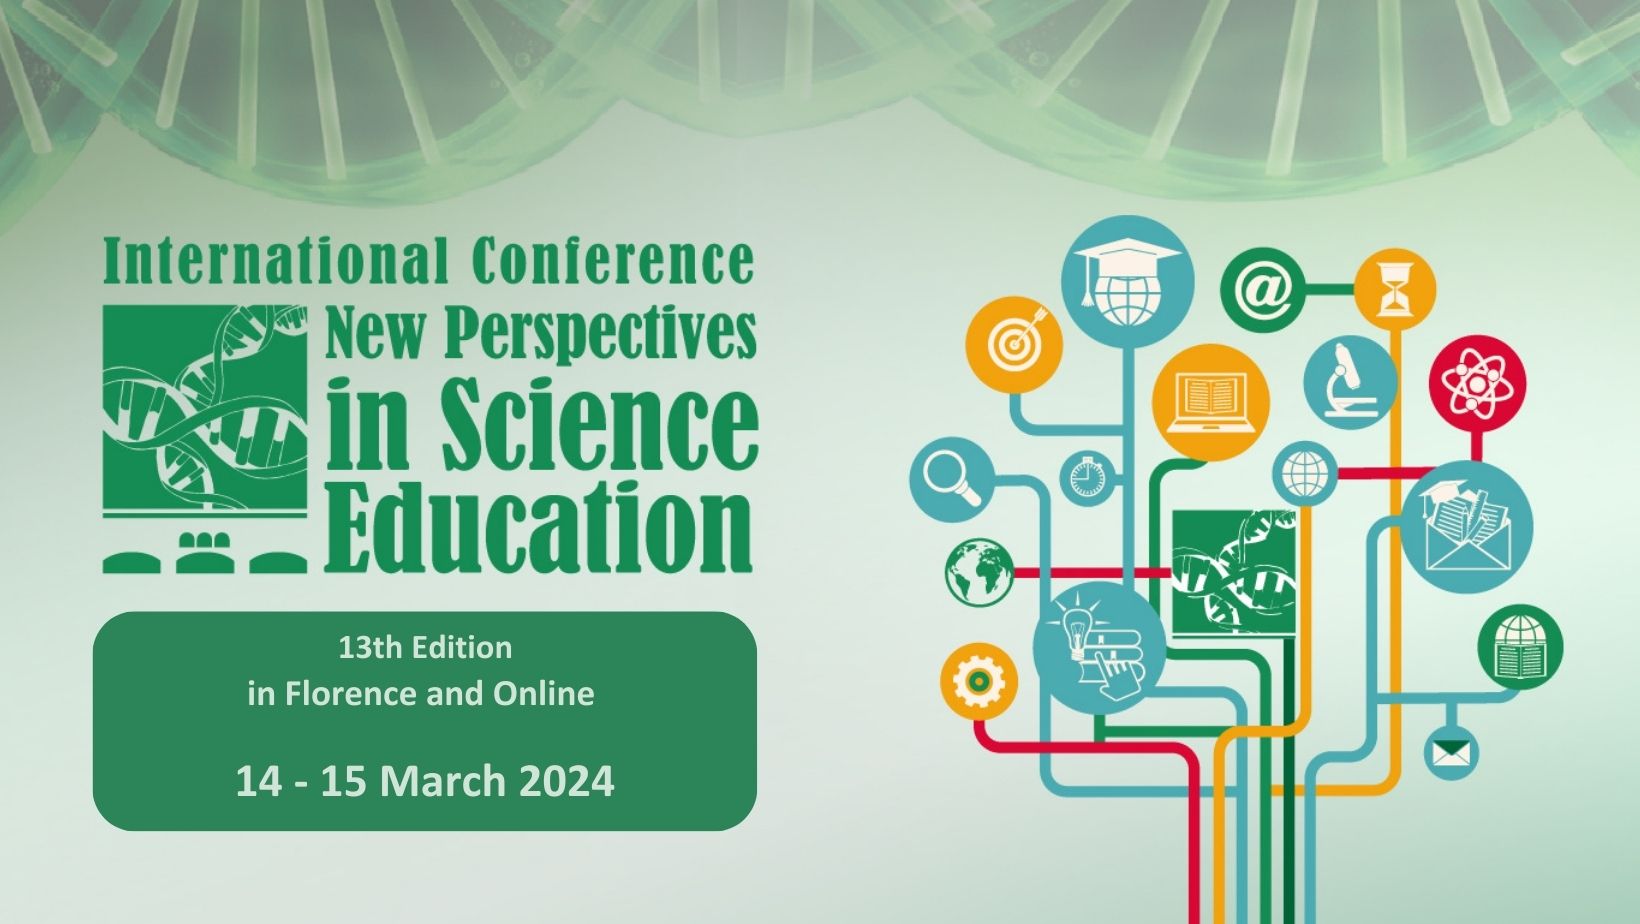 NPSE 2024 | New Perspectives in Science Education 13th Edition - International Conference, Florence, Toscana, Italy